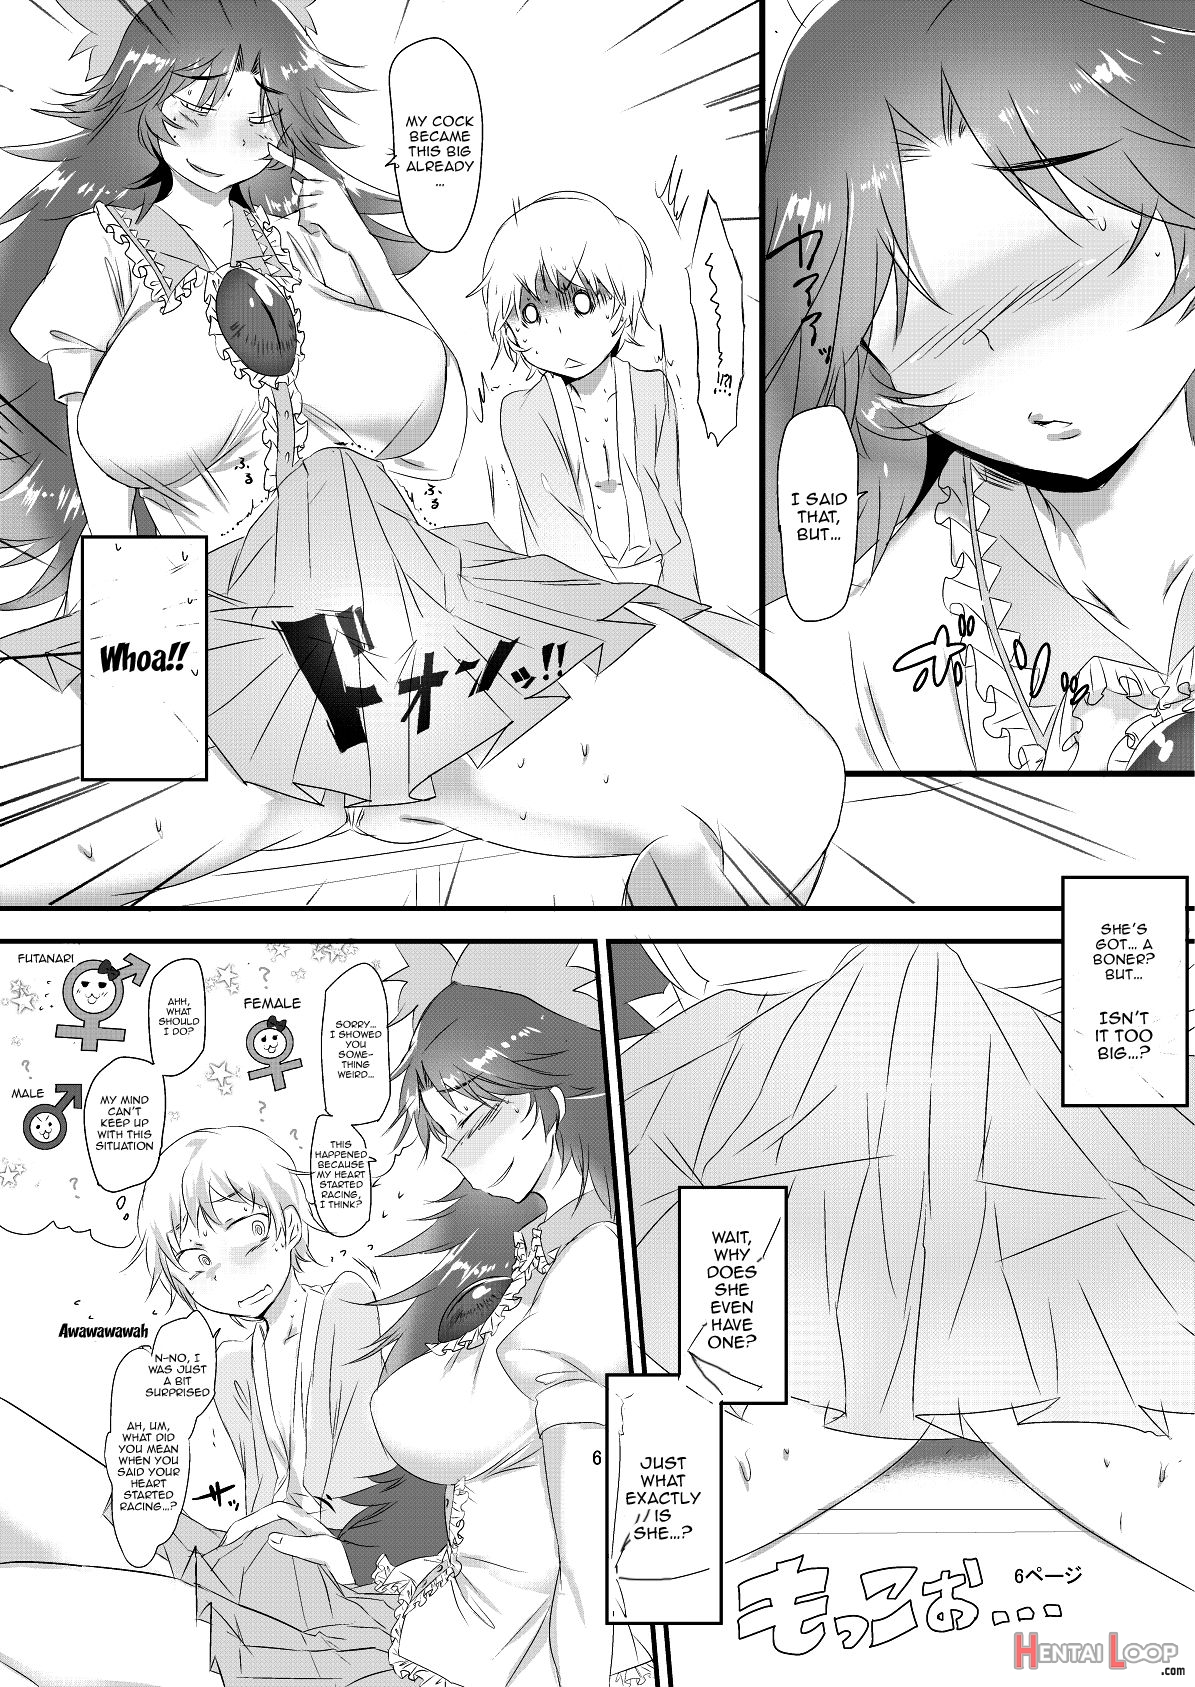 Together With A Futa Youkai page 7